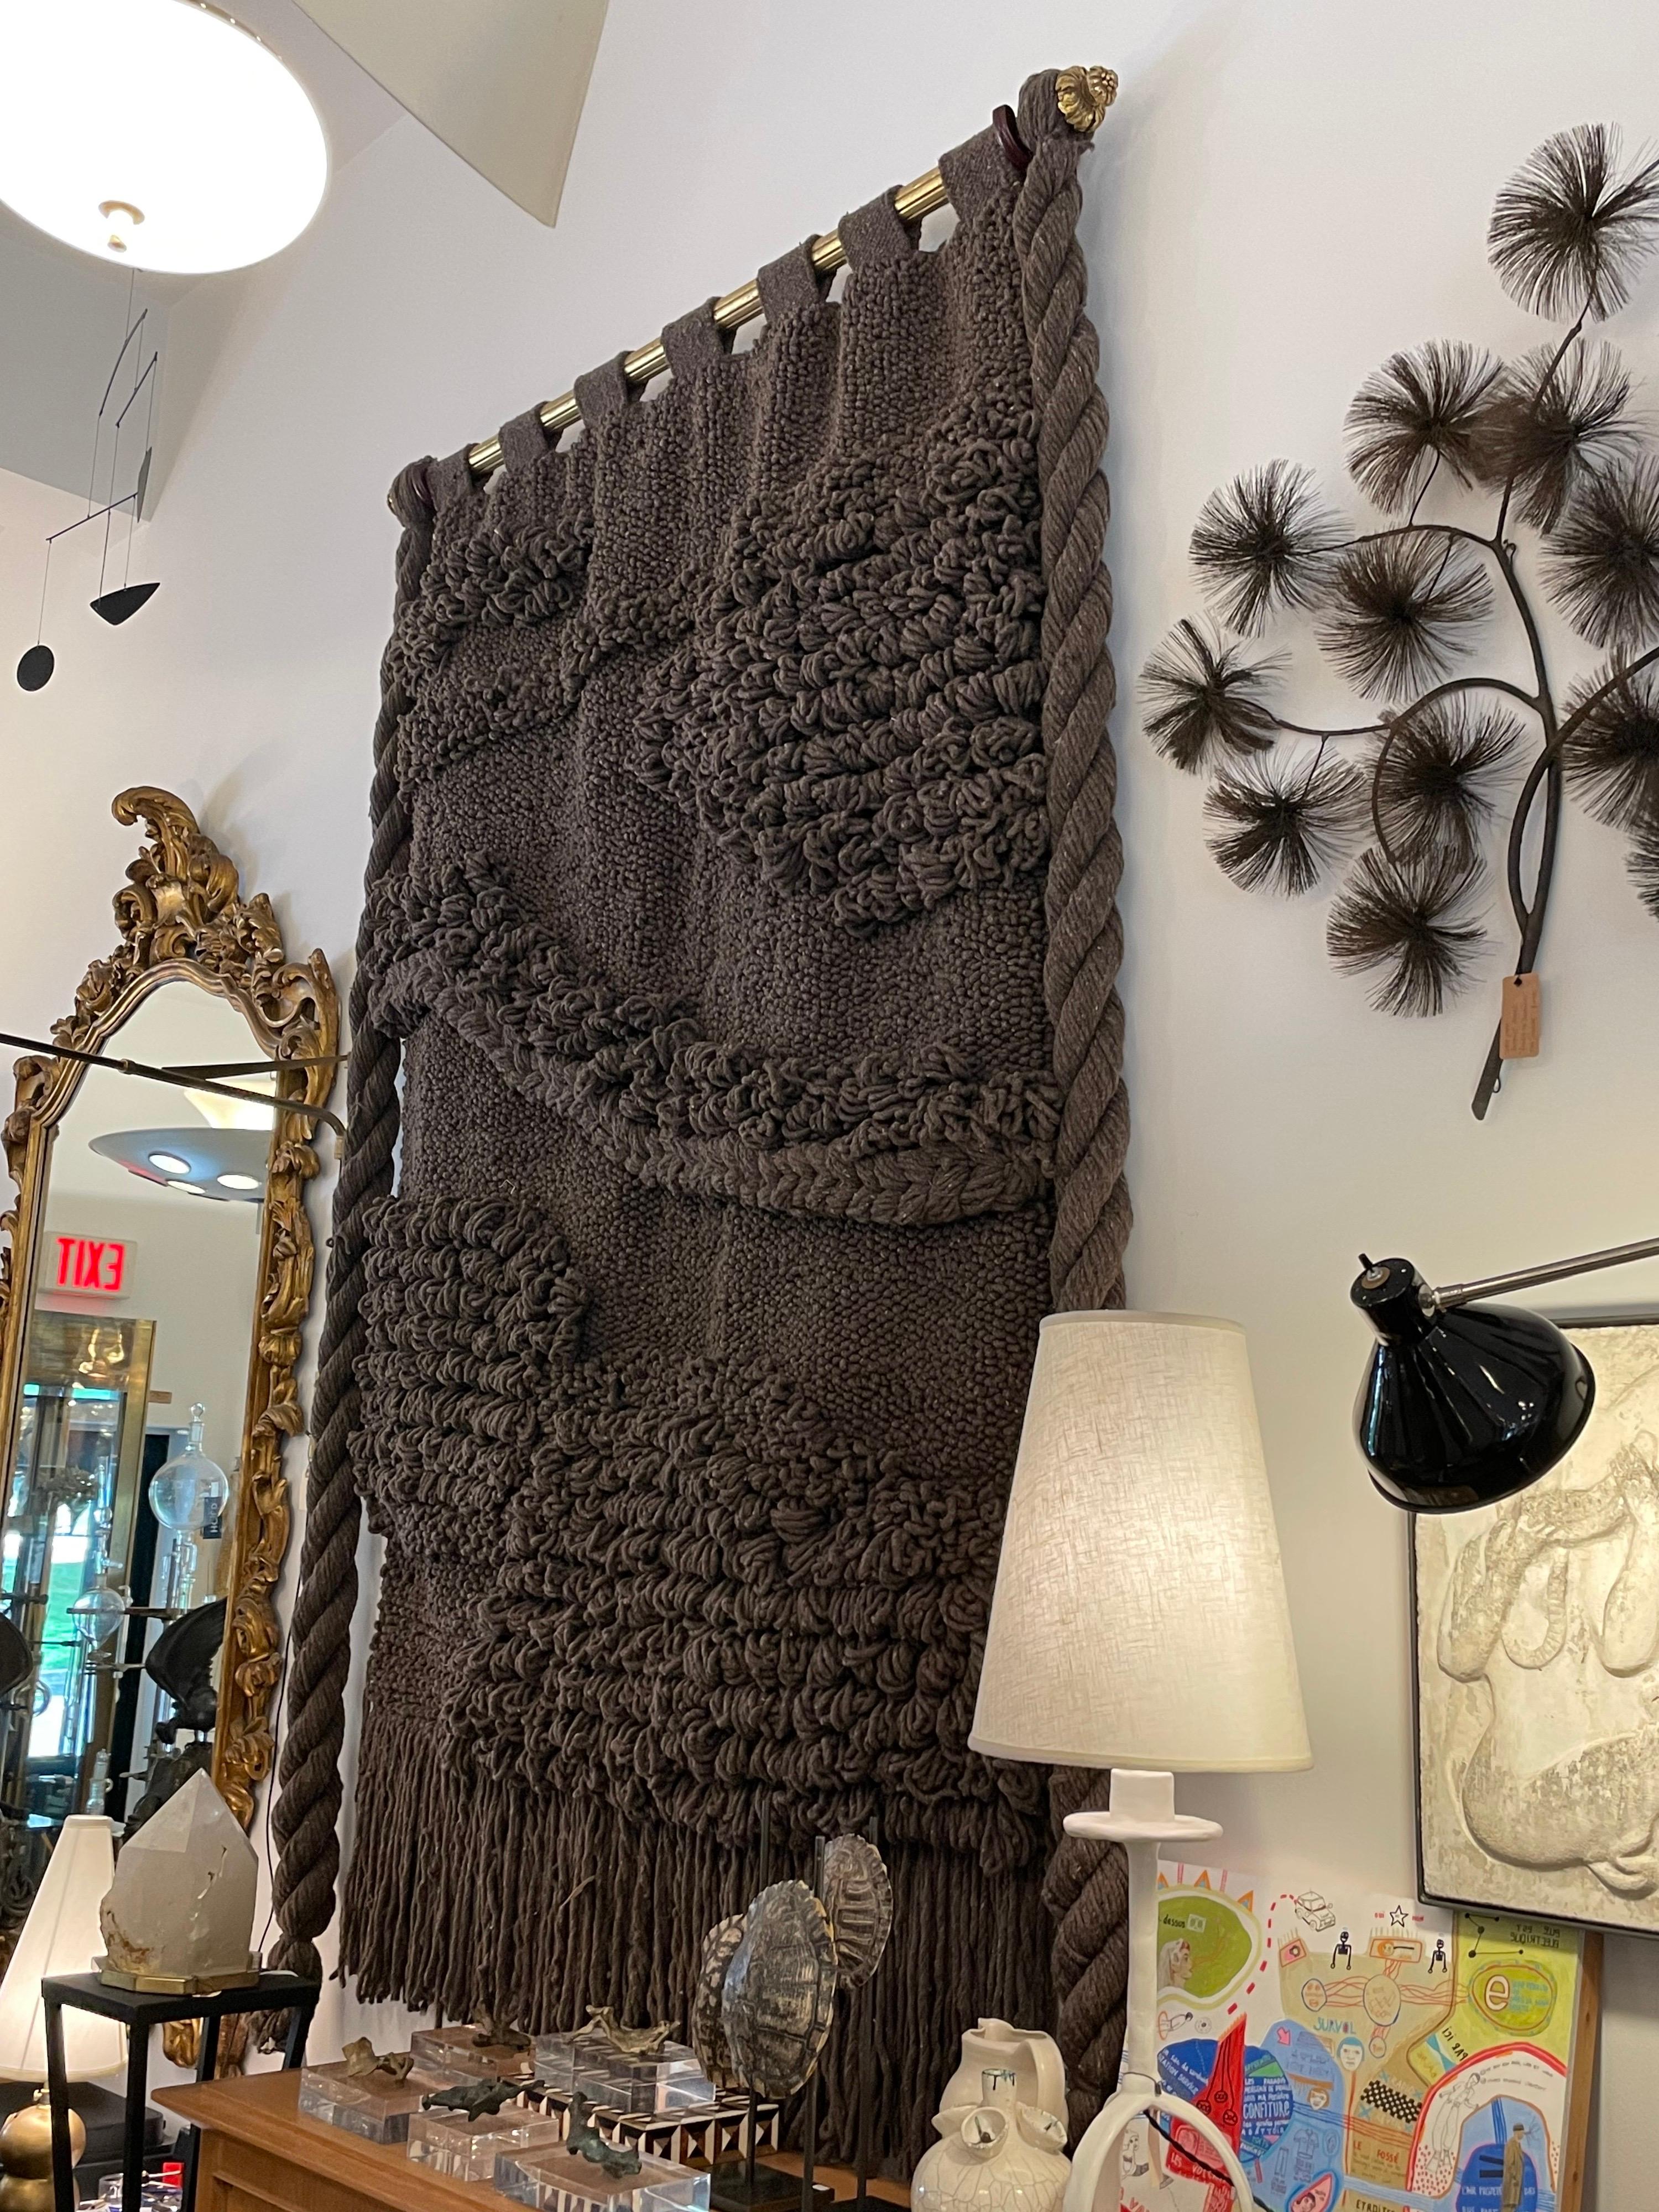 Huge Hand Woven Wool Wall Tapestry in Chocolate/Charcoal Tone In Good Condition For Sale In East Hampton, NY